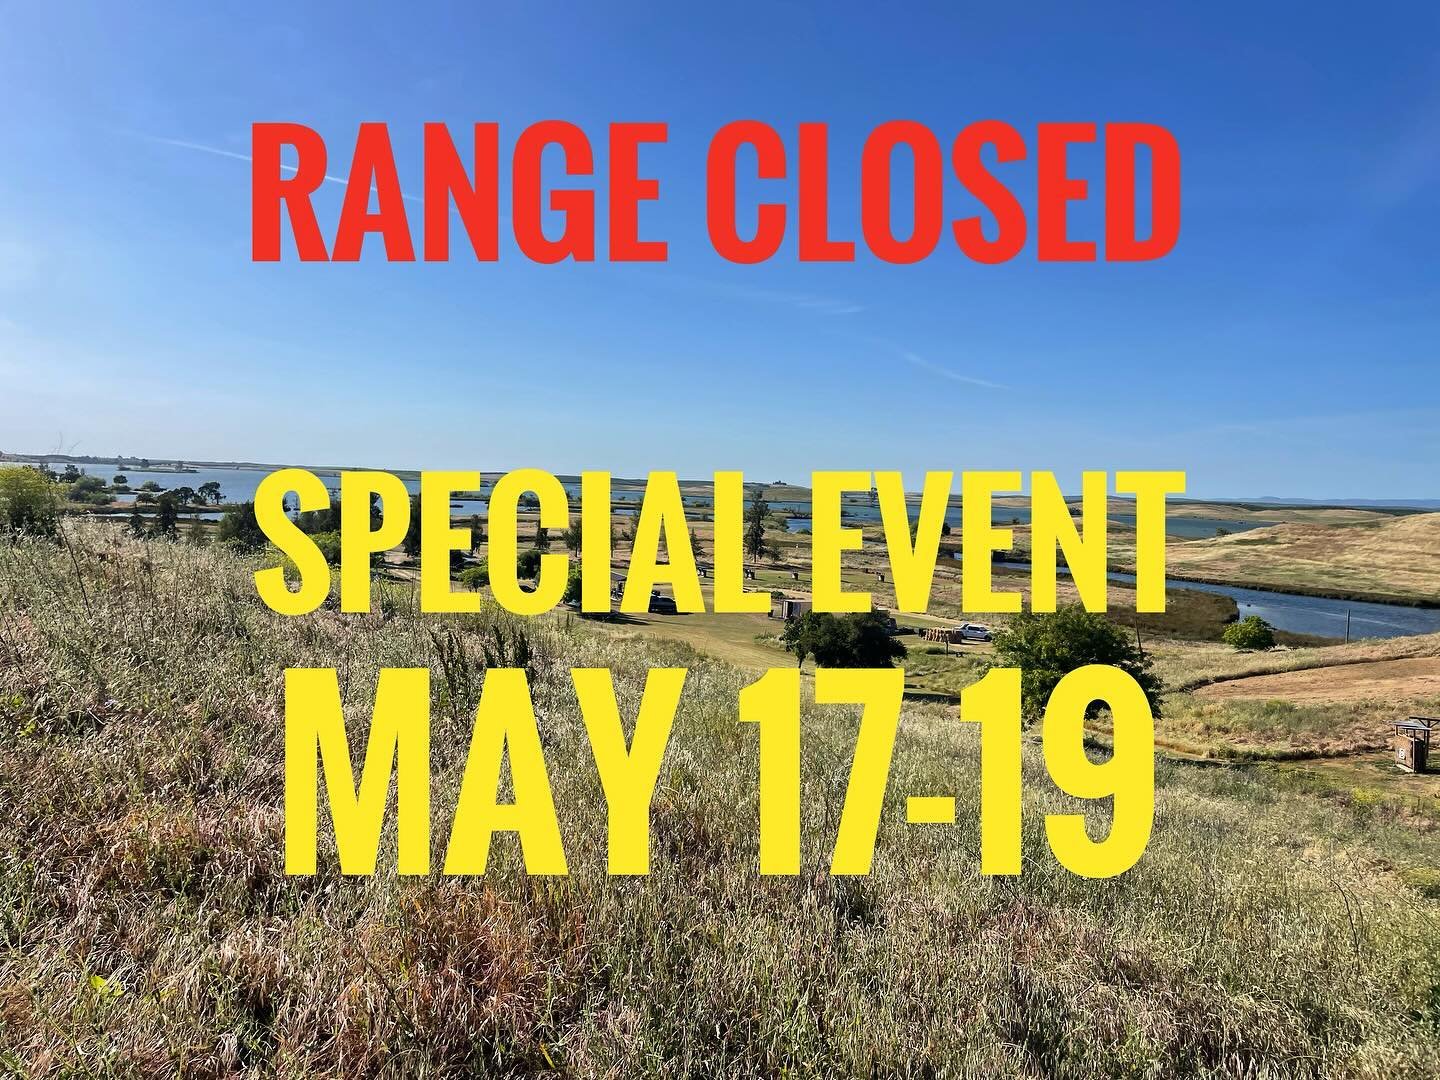 Attention compound archers, this weekend 5/17-19 the range will be closed to compound archery as we are holding or Bill Sullivan Traditional Shoot. We will be utilizing the whole range and the area West of the range for our planned activities. The pr